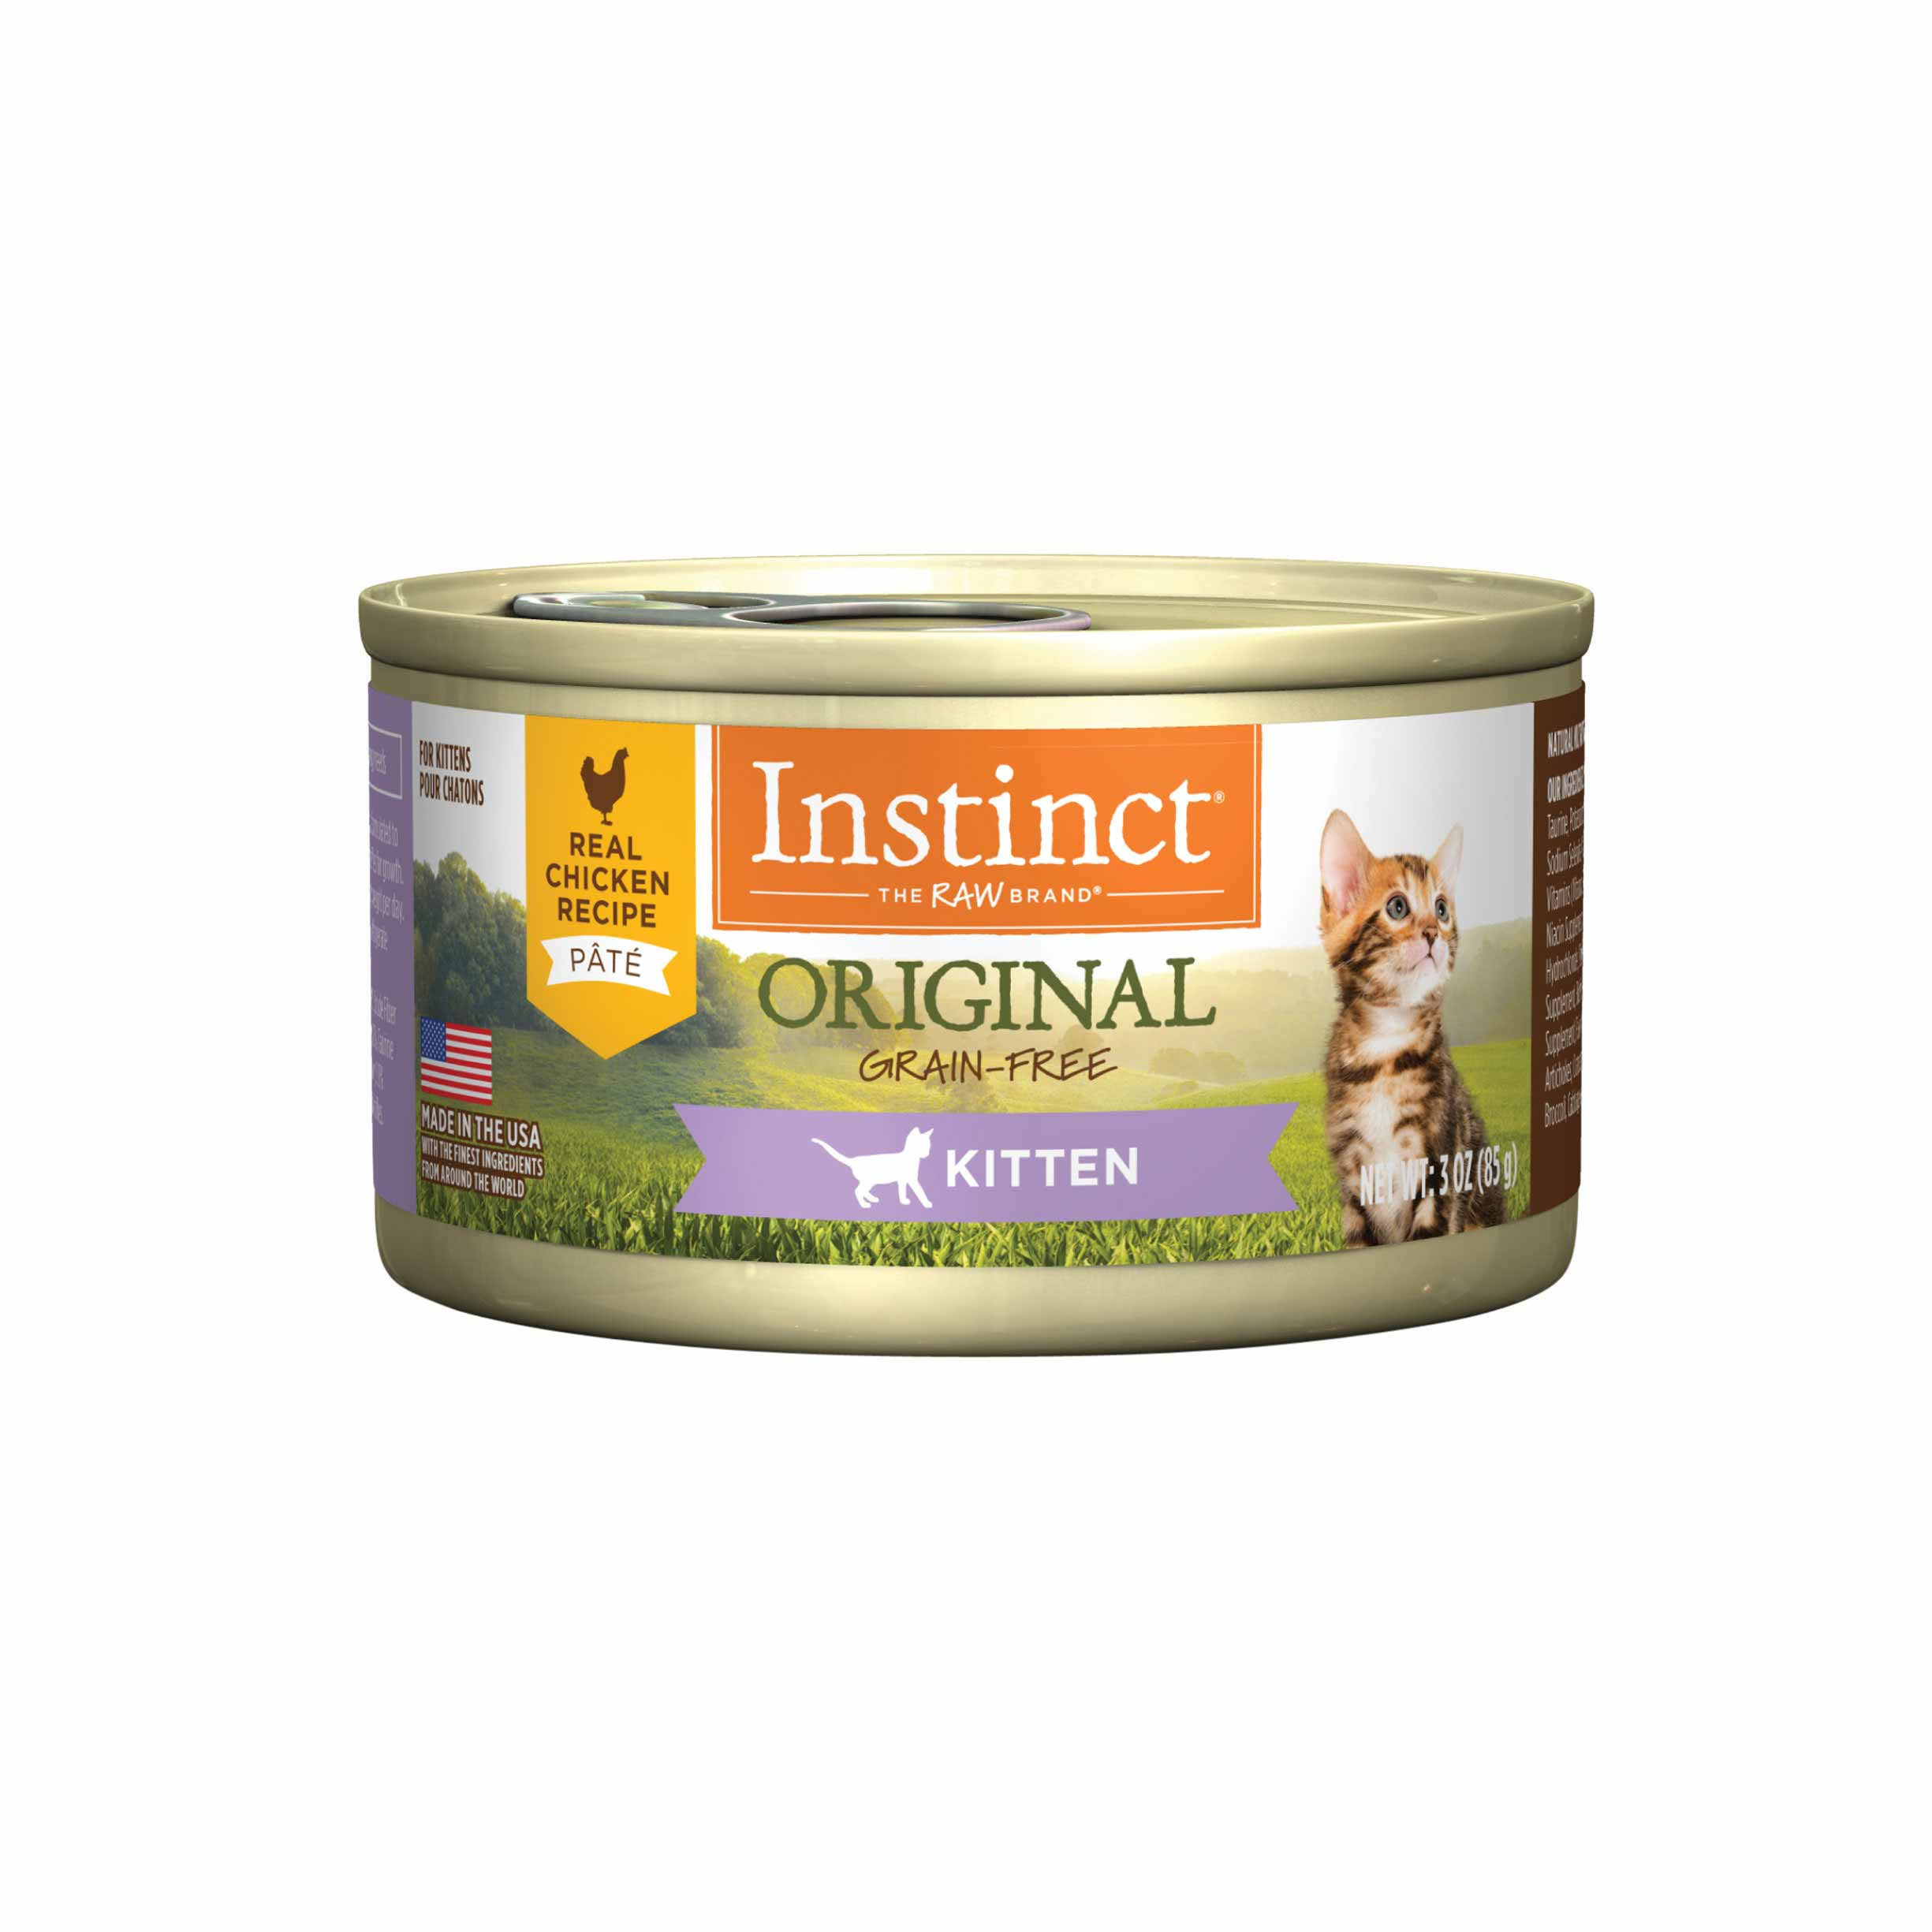 Instinct Kitted Food - Real Chicken Recipe, 85g